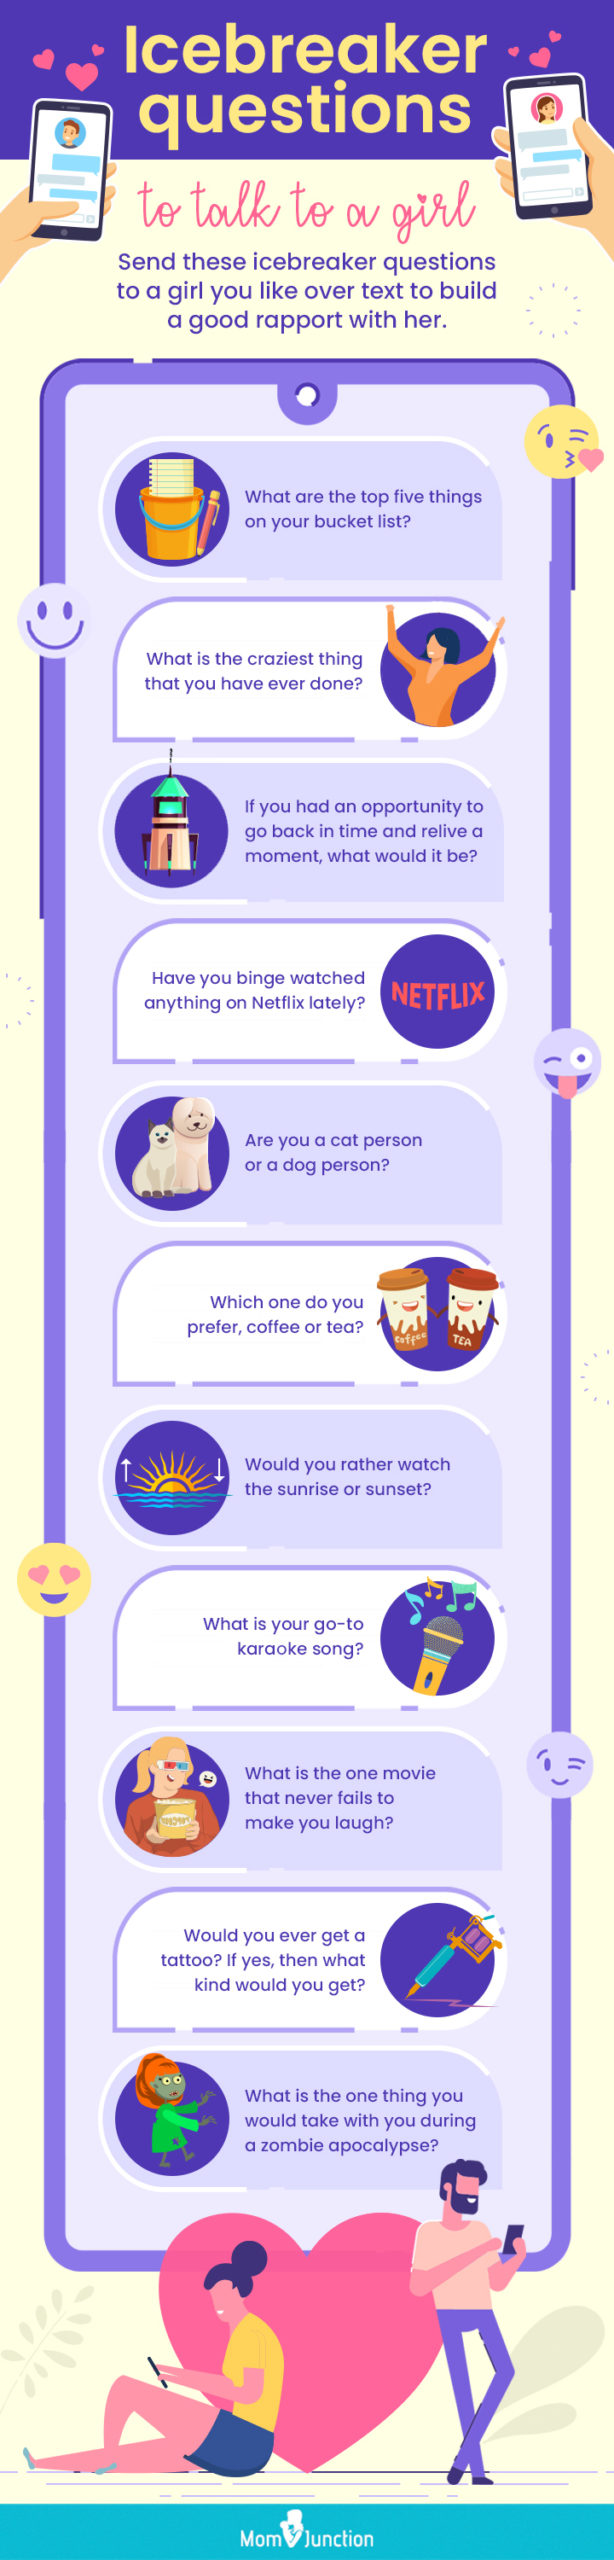 icebreaker questions to talk to a girl (infographic)